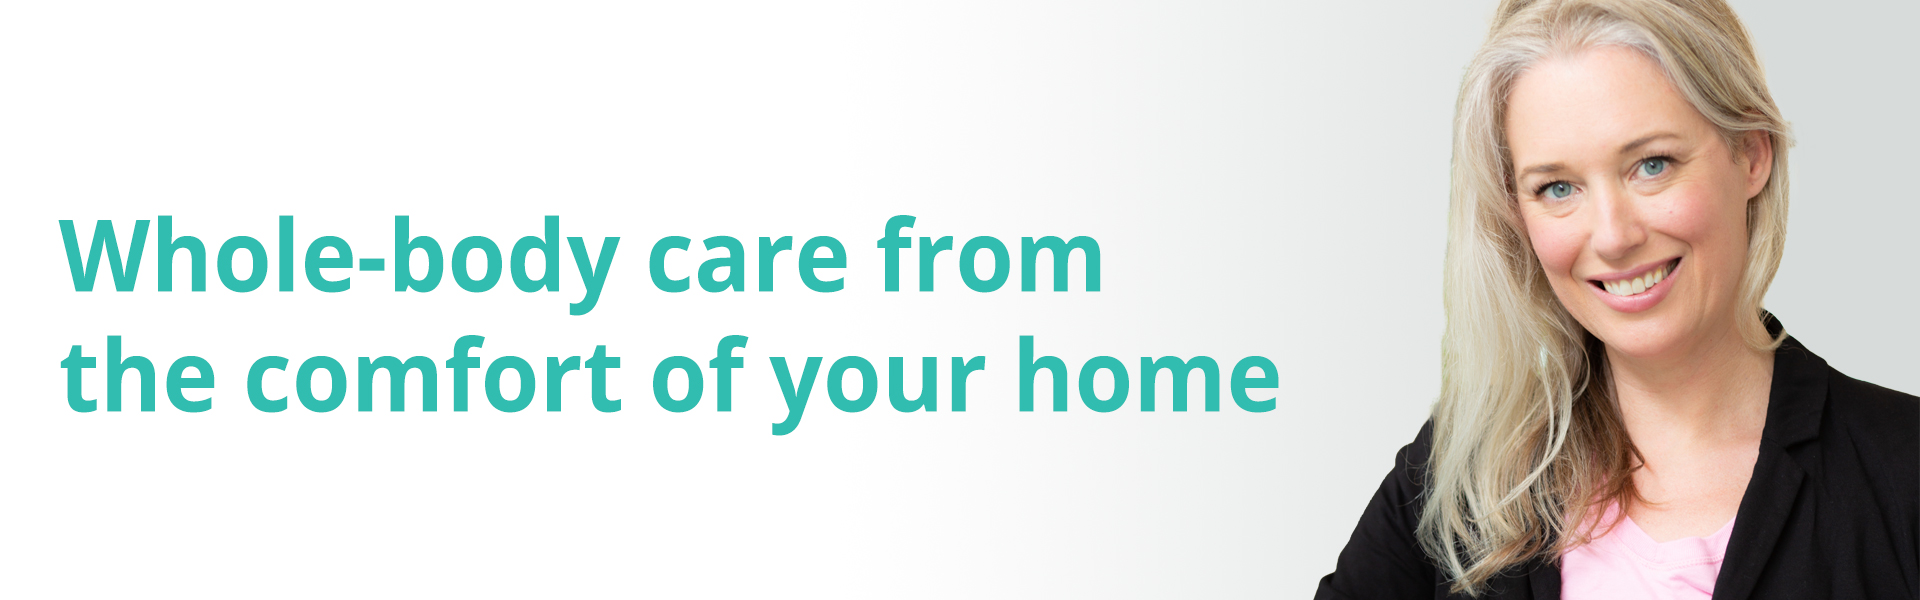 whole body care from the comfort of your home